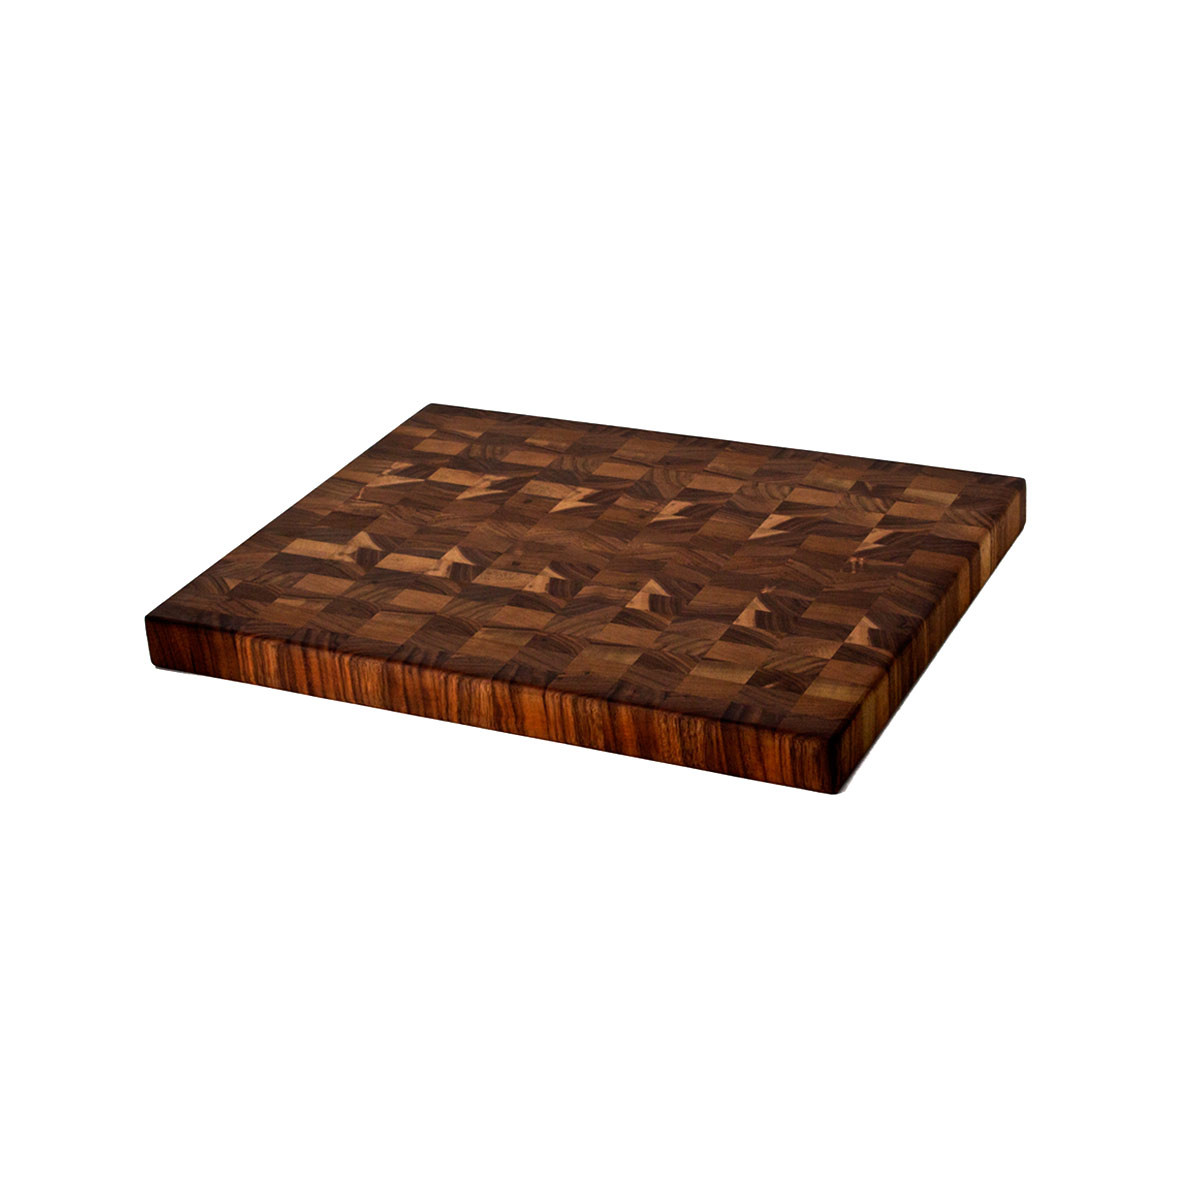 8cm Thick End Grain Chopping Board - Customisable